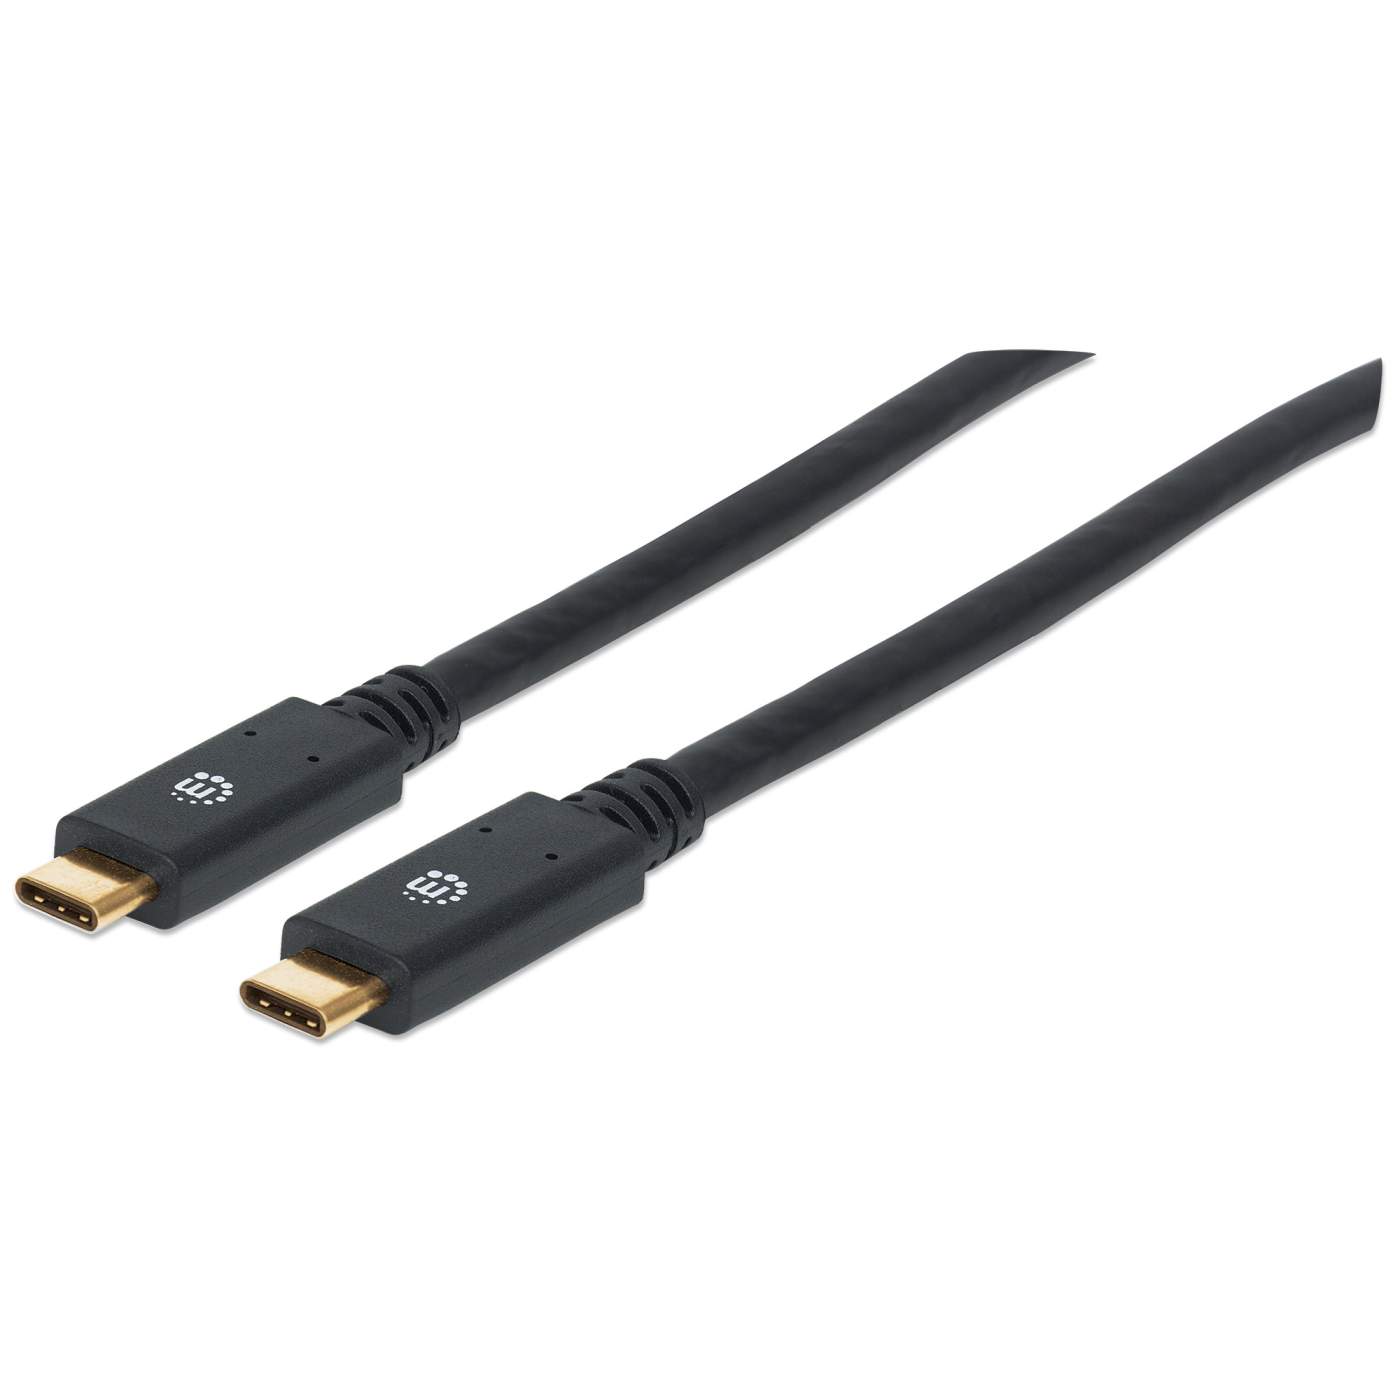 USB 3.0 Type-C Device Cable Image 1